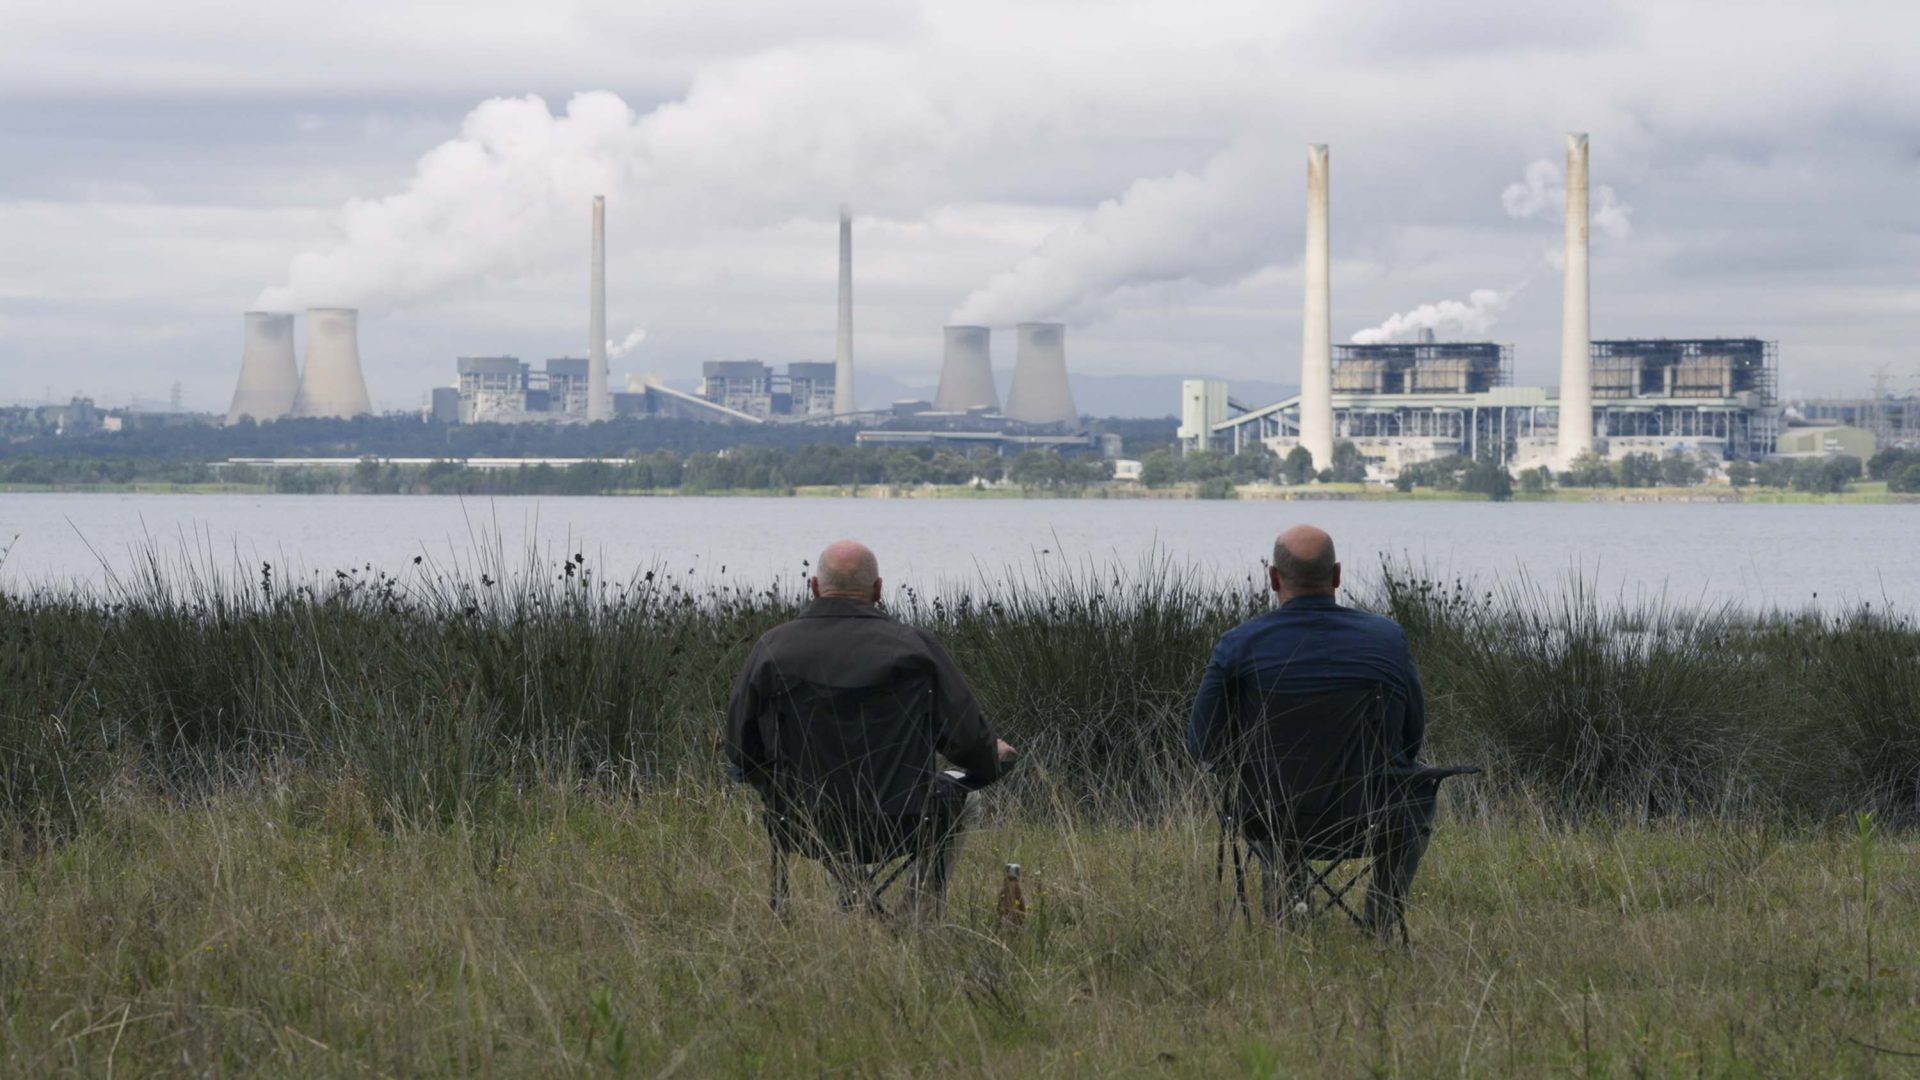 Two men sit on chairs looking over at a power station from across the water.